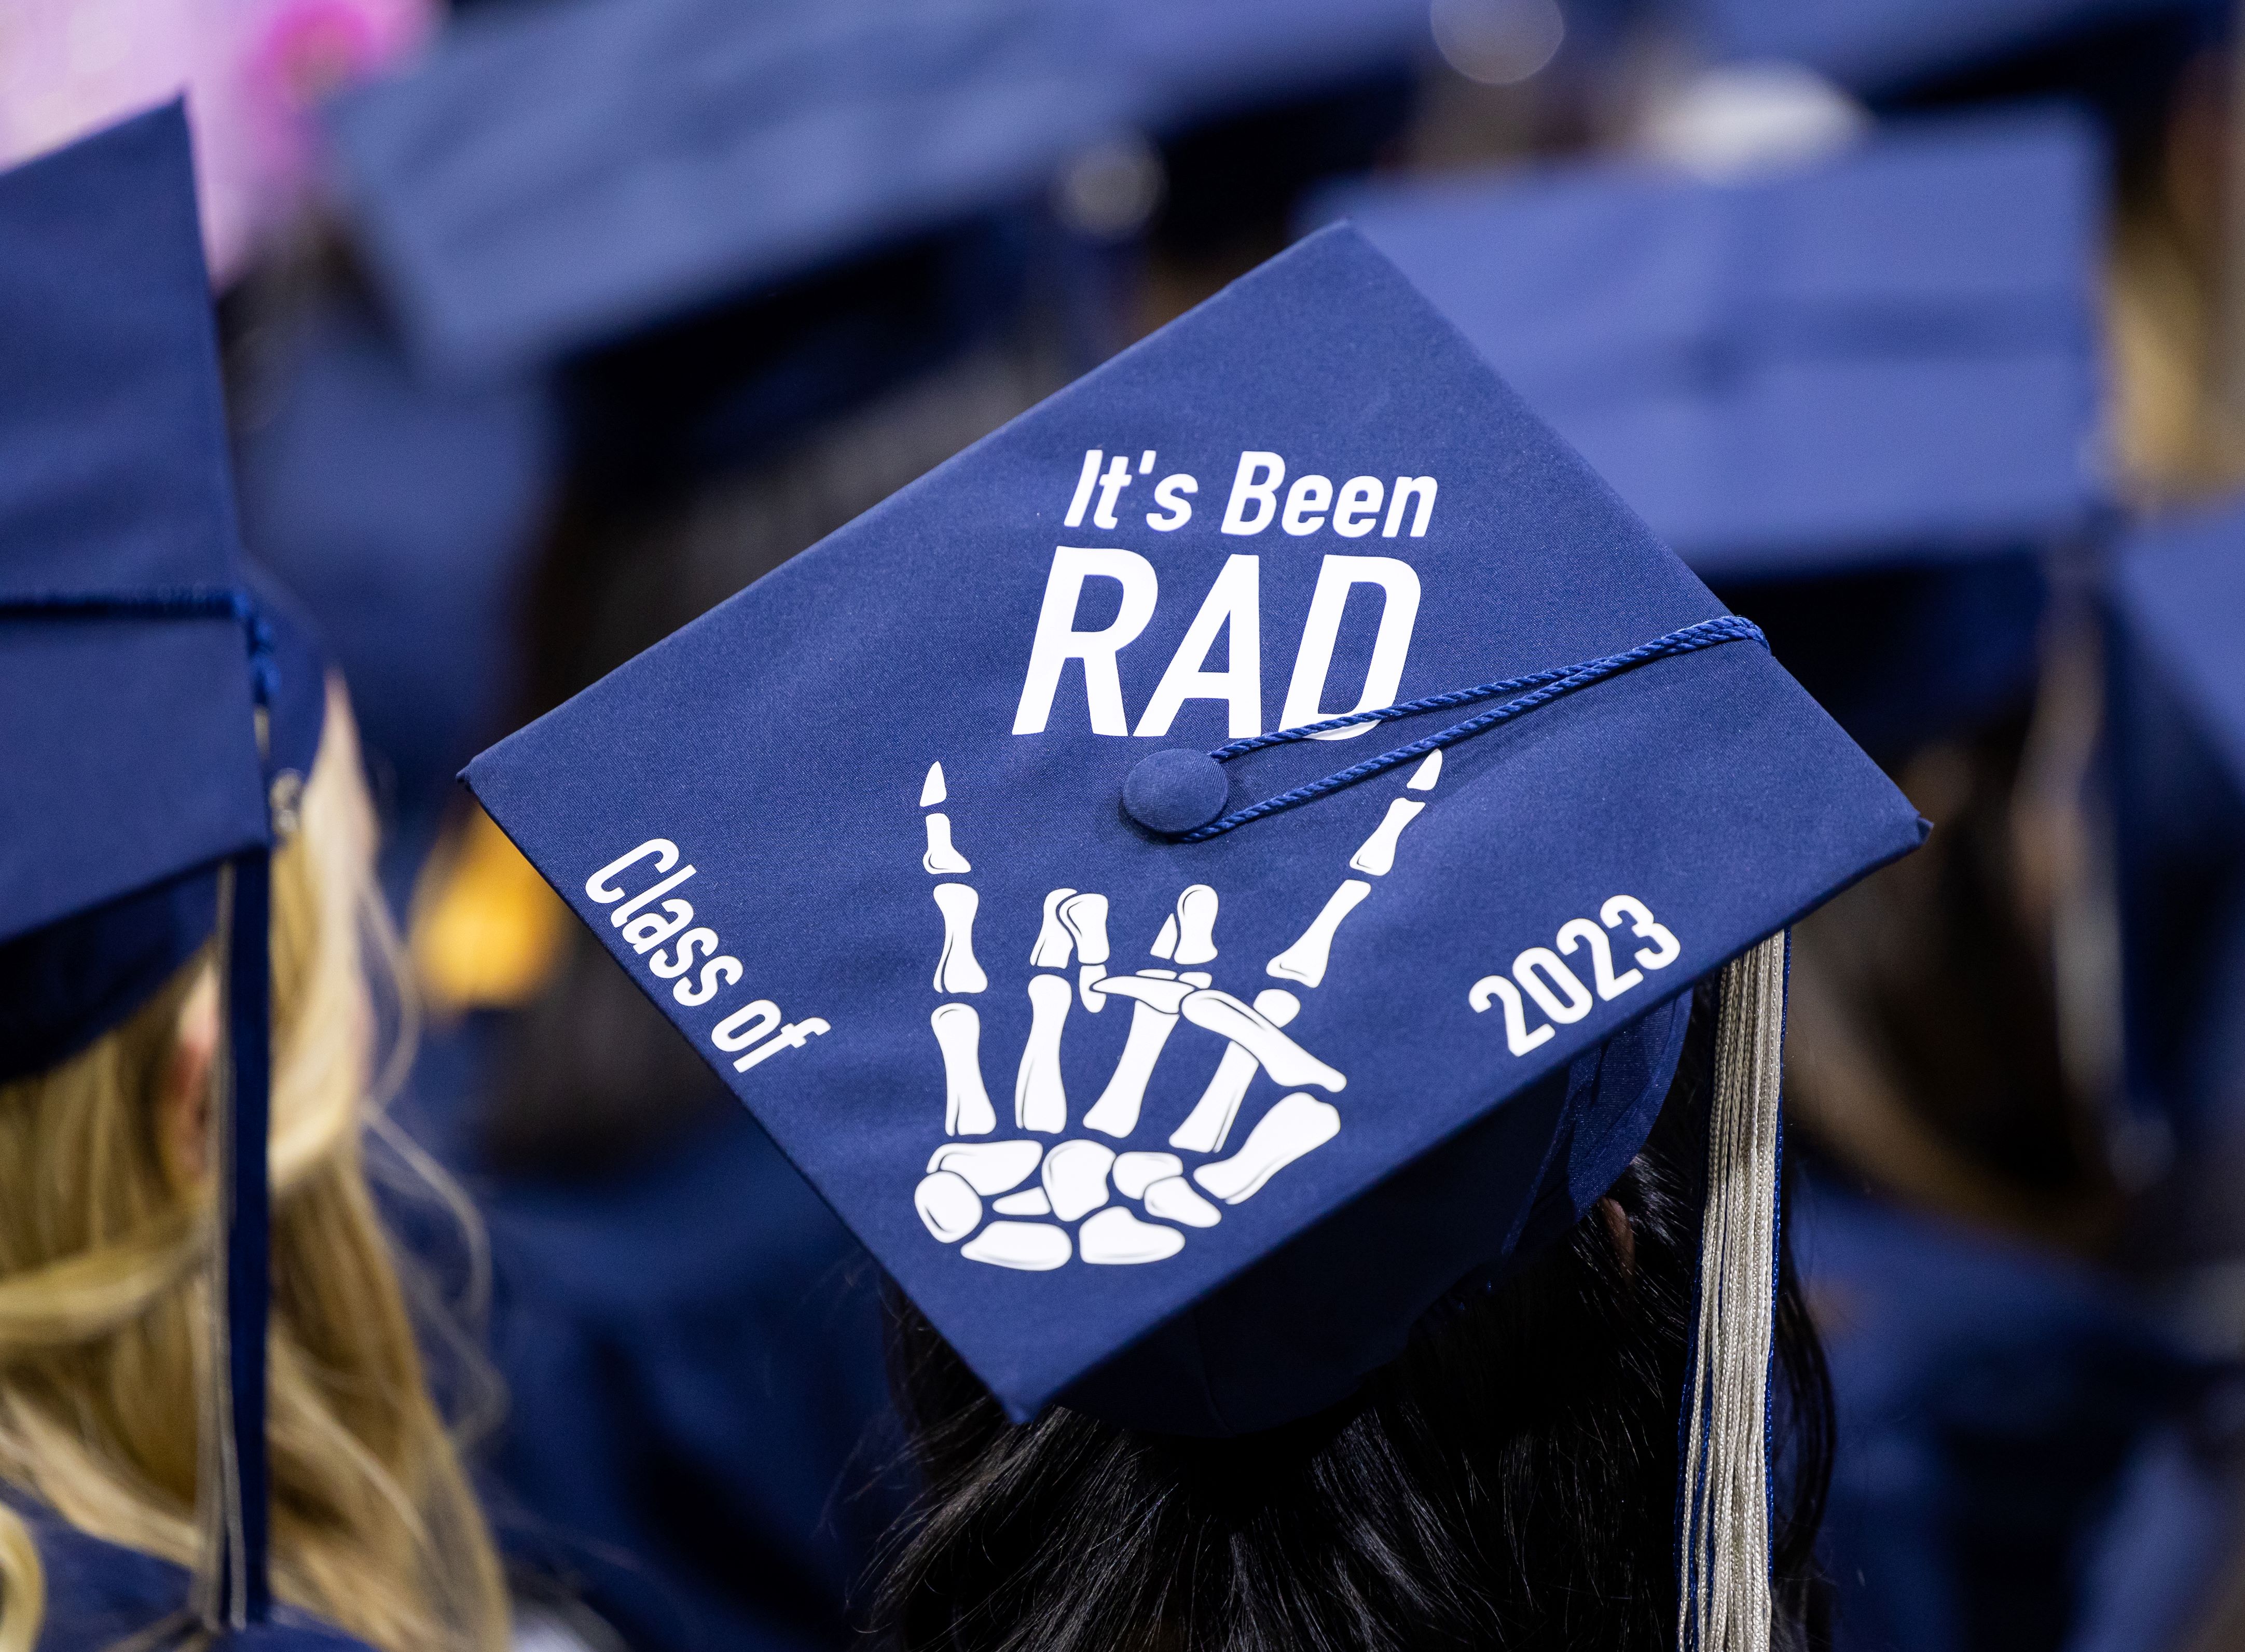 A radiologic technology graduate's hat says it's been rad with a skeleton hand